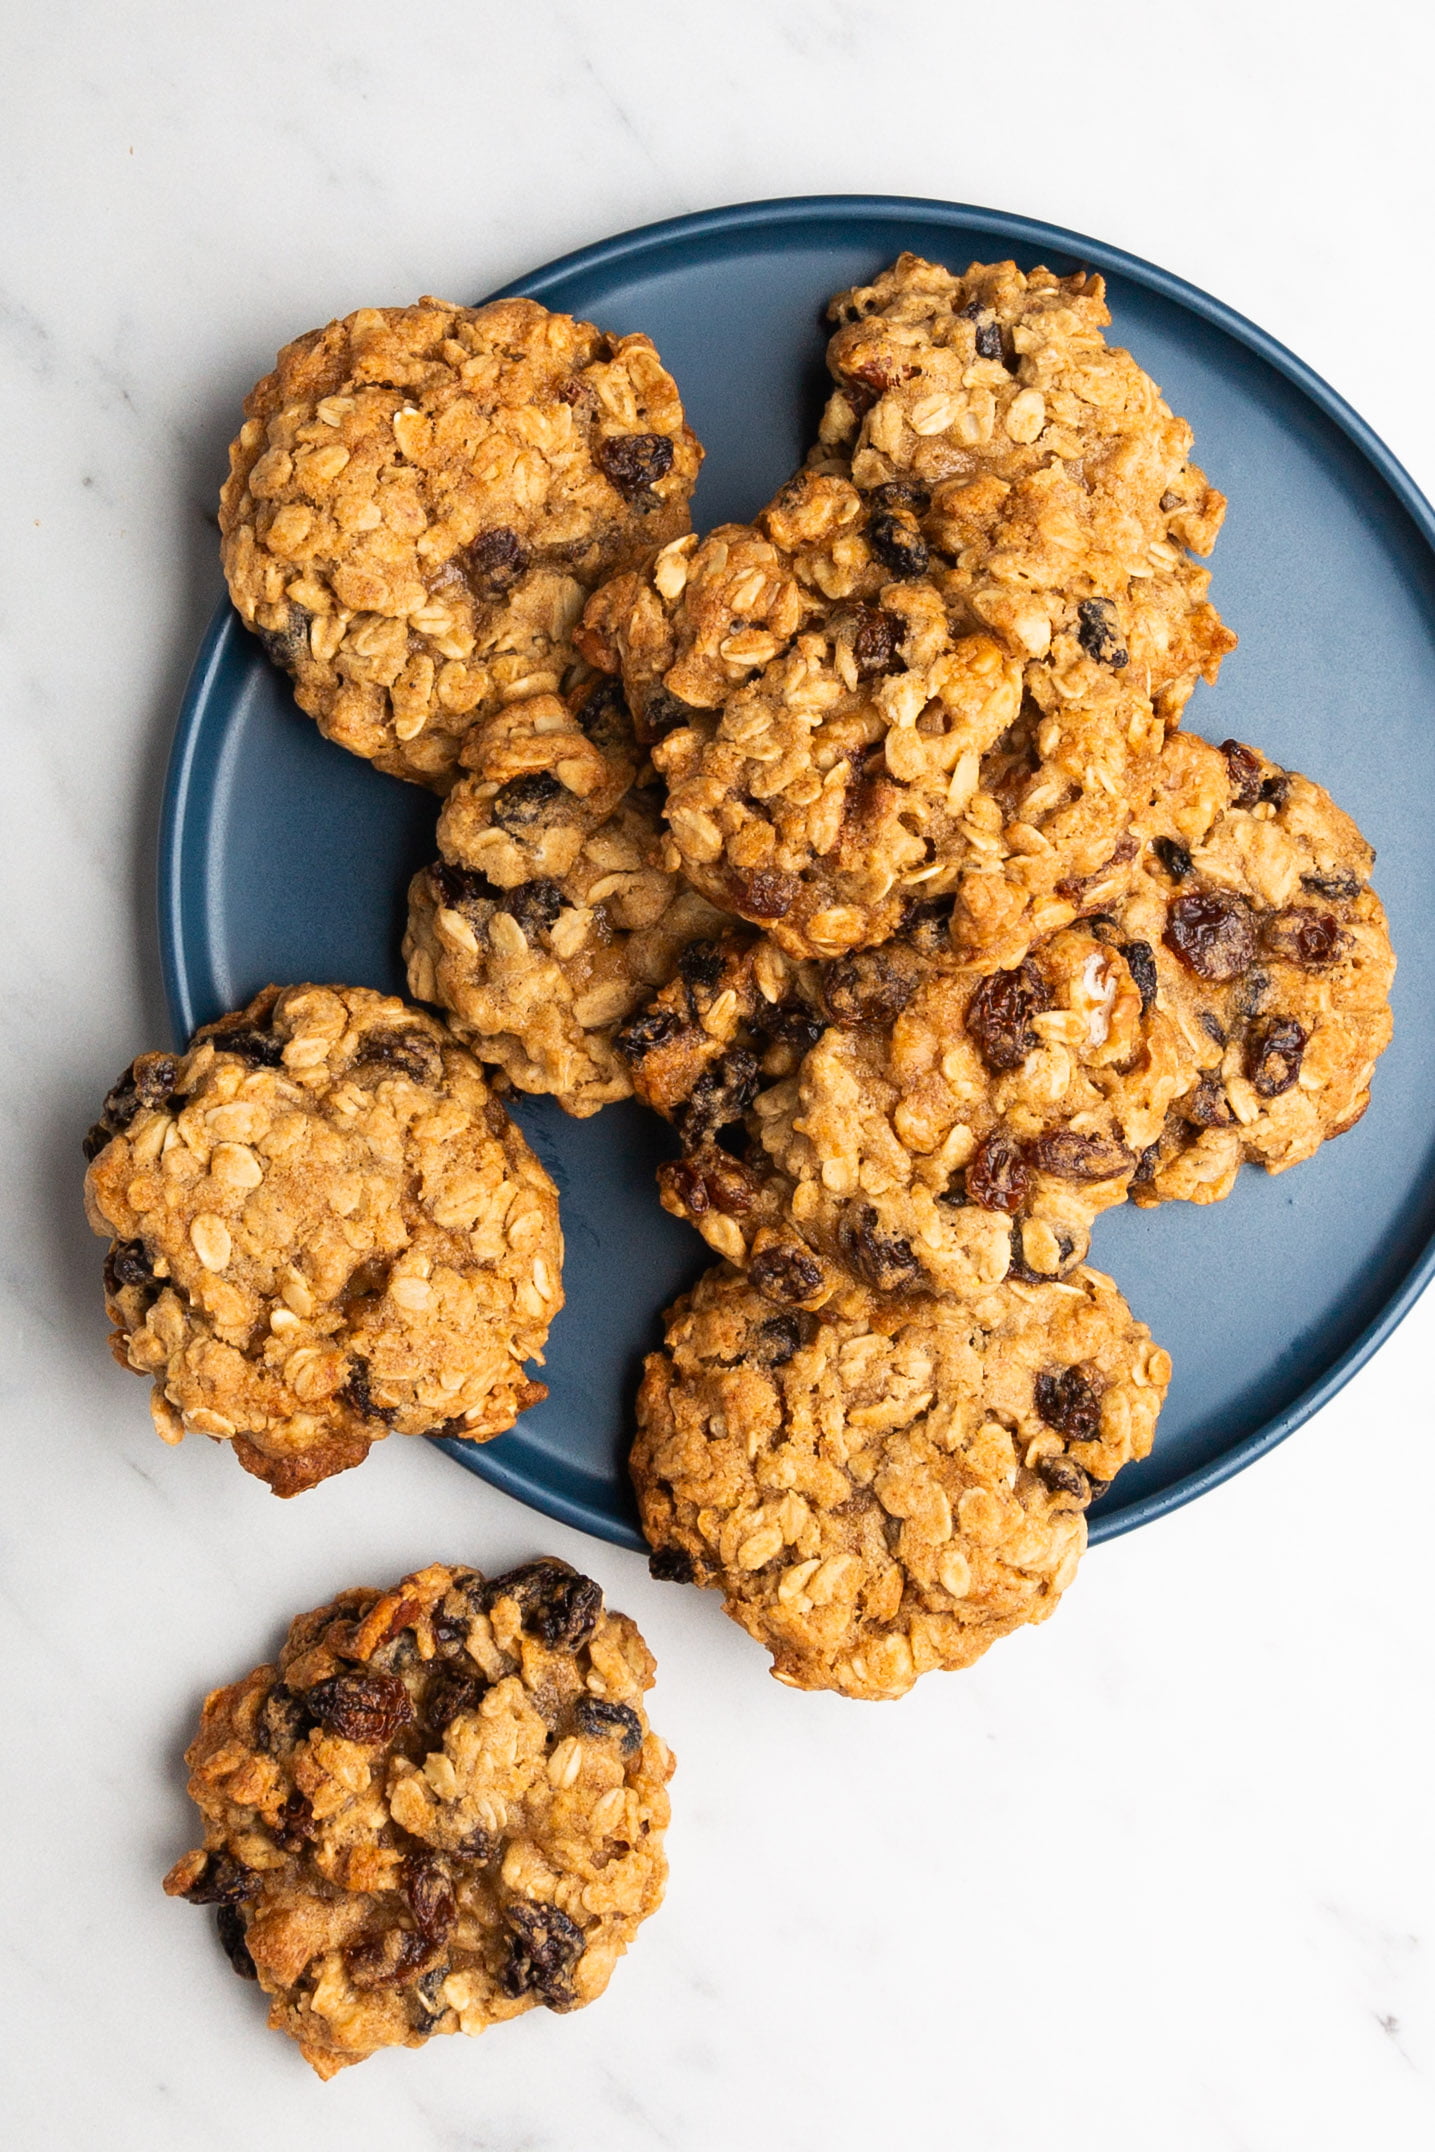 Delicious oatmeal cookies on a blue plate.